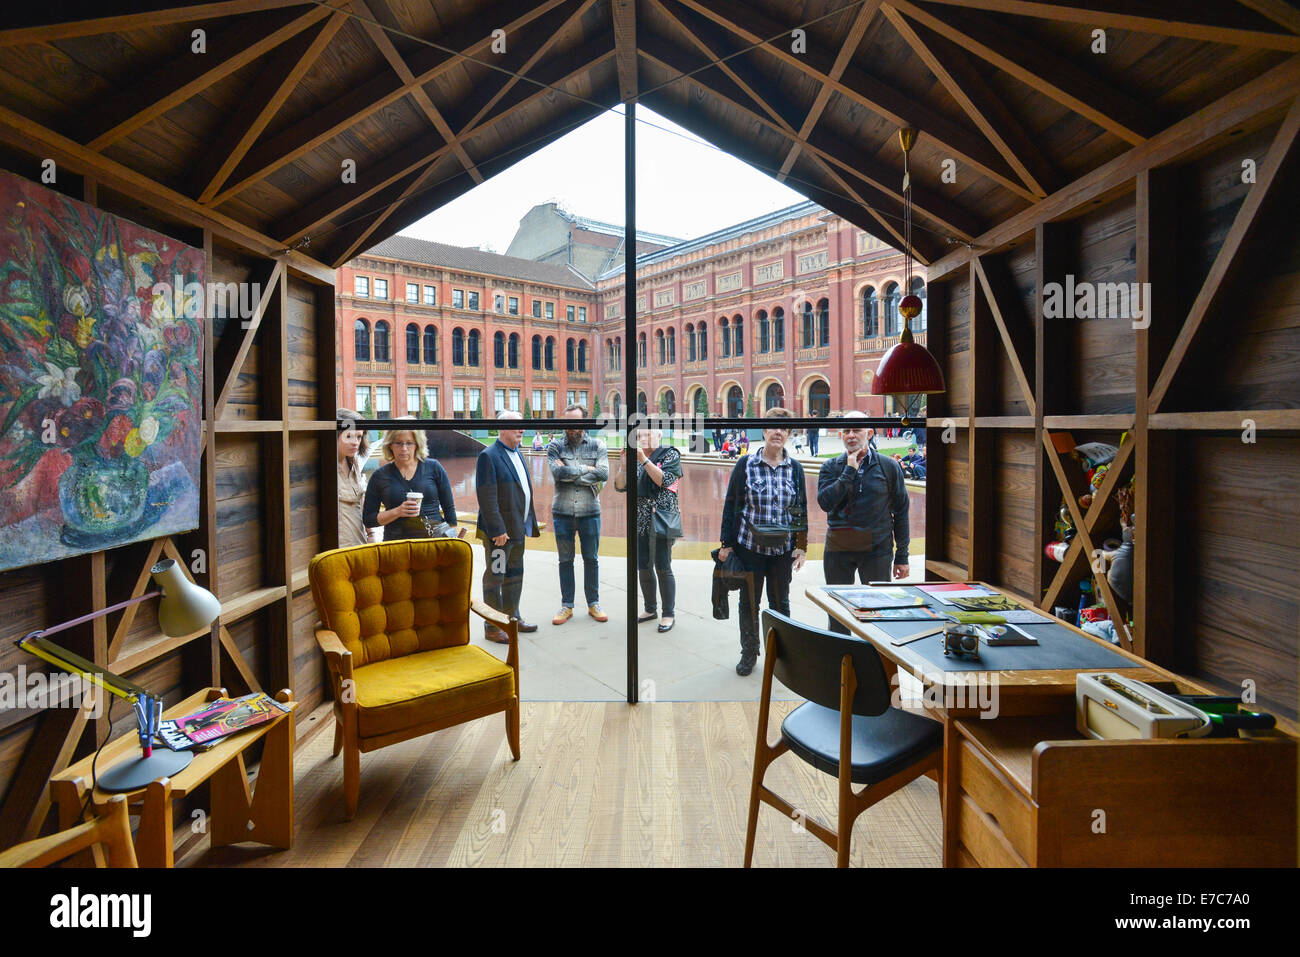 London Design Festival at the V&A 2014: Installations and Displays